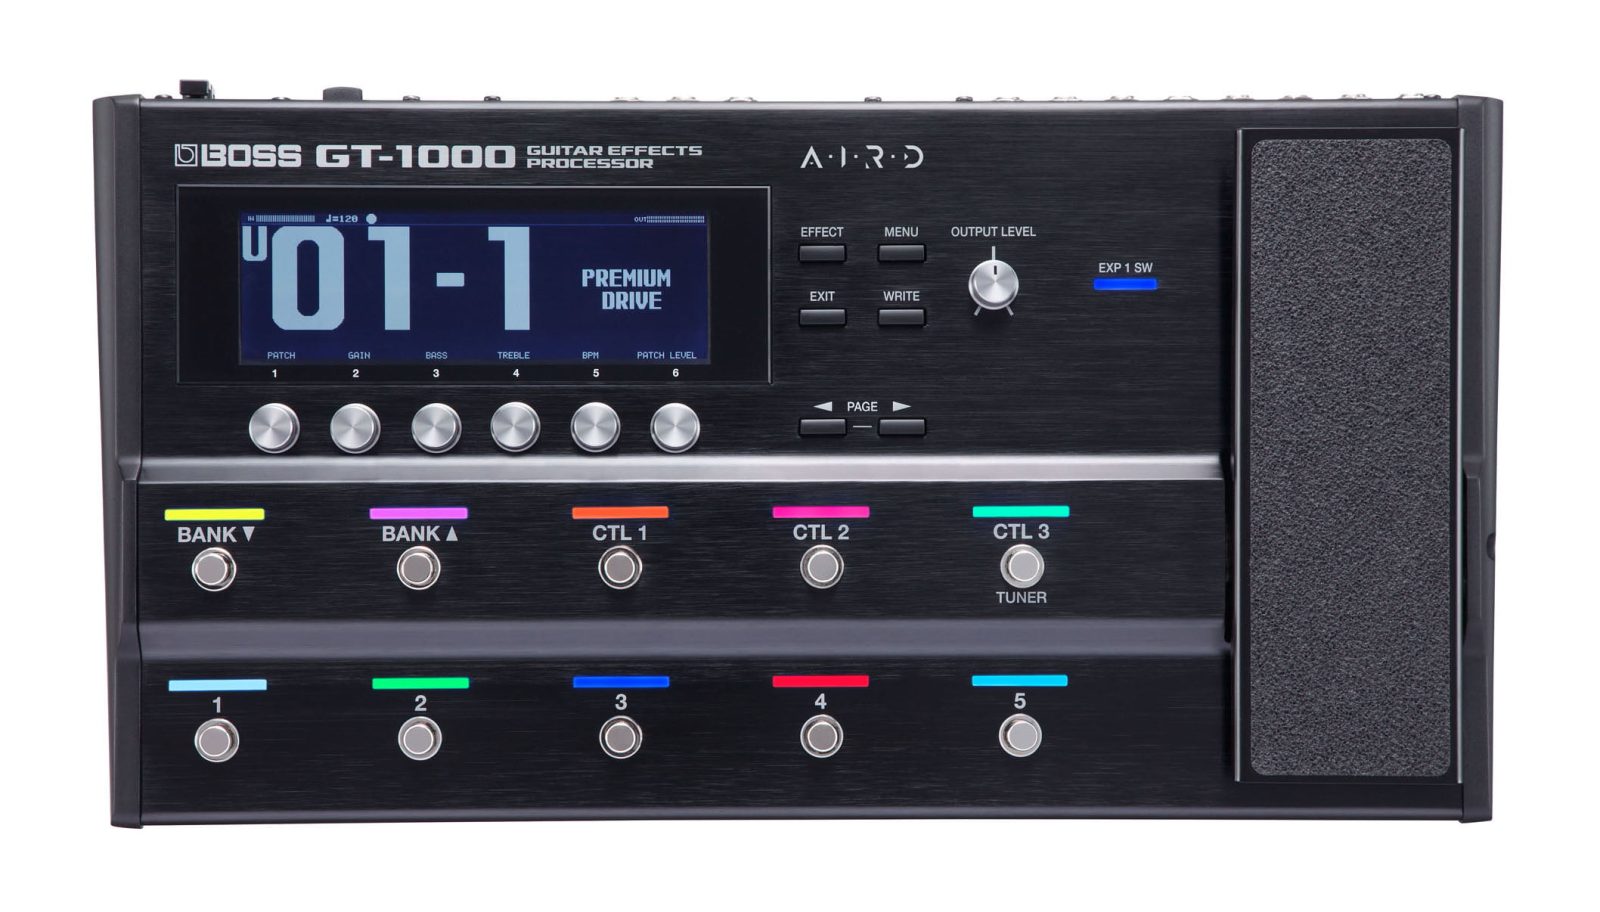 BOSS GT-1000 update adds bass guitar support, new footswitch modes & more